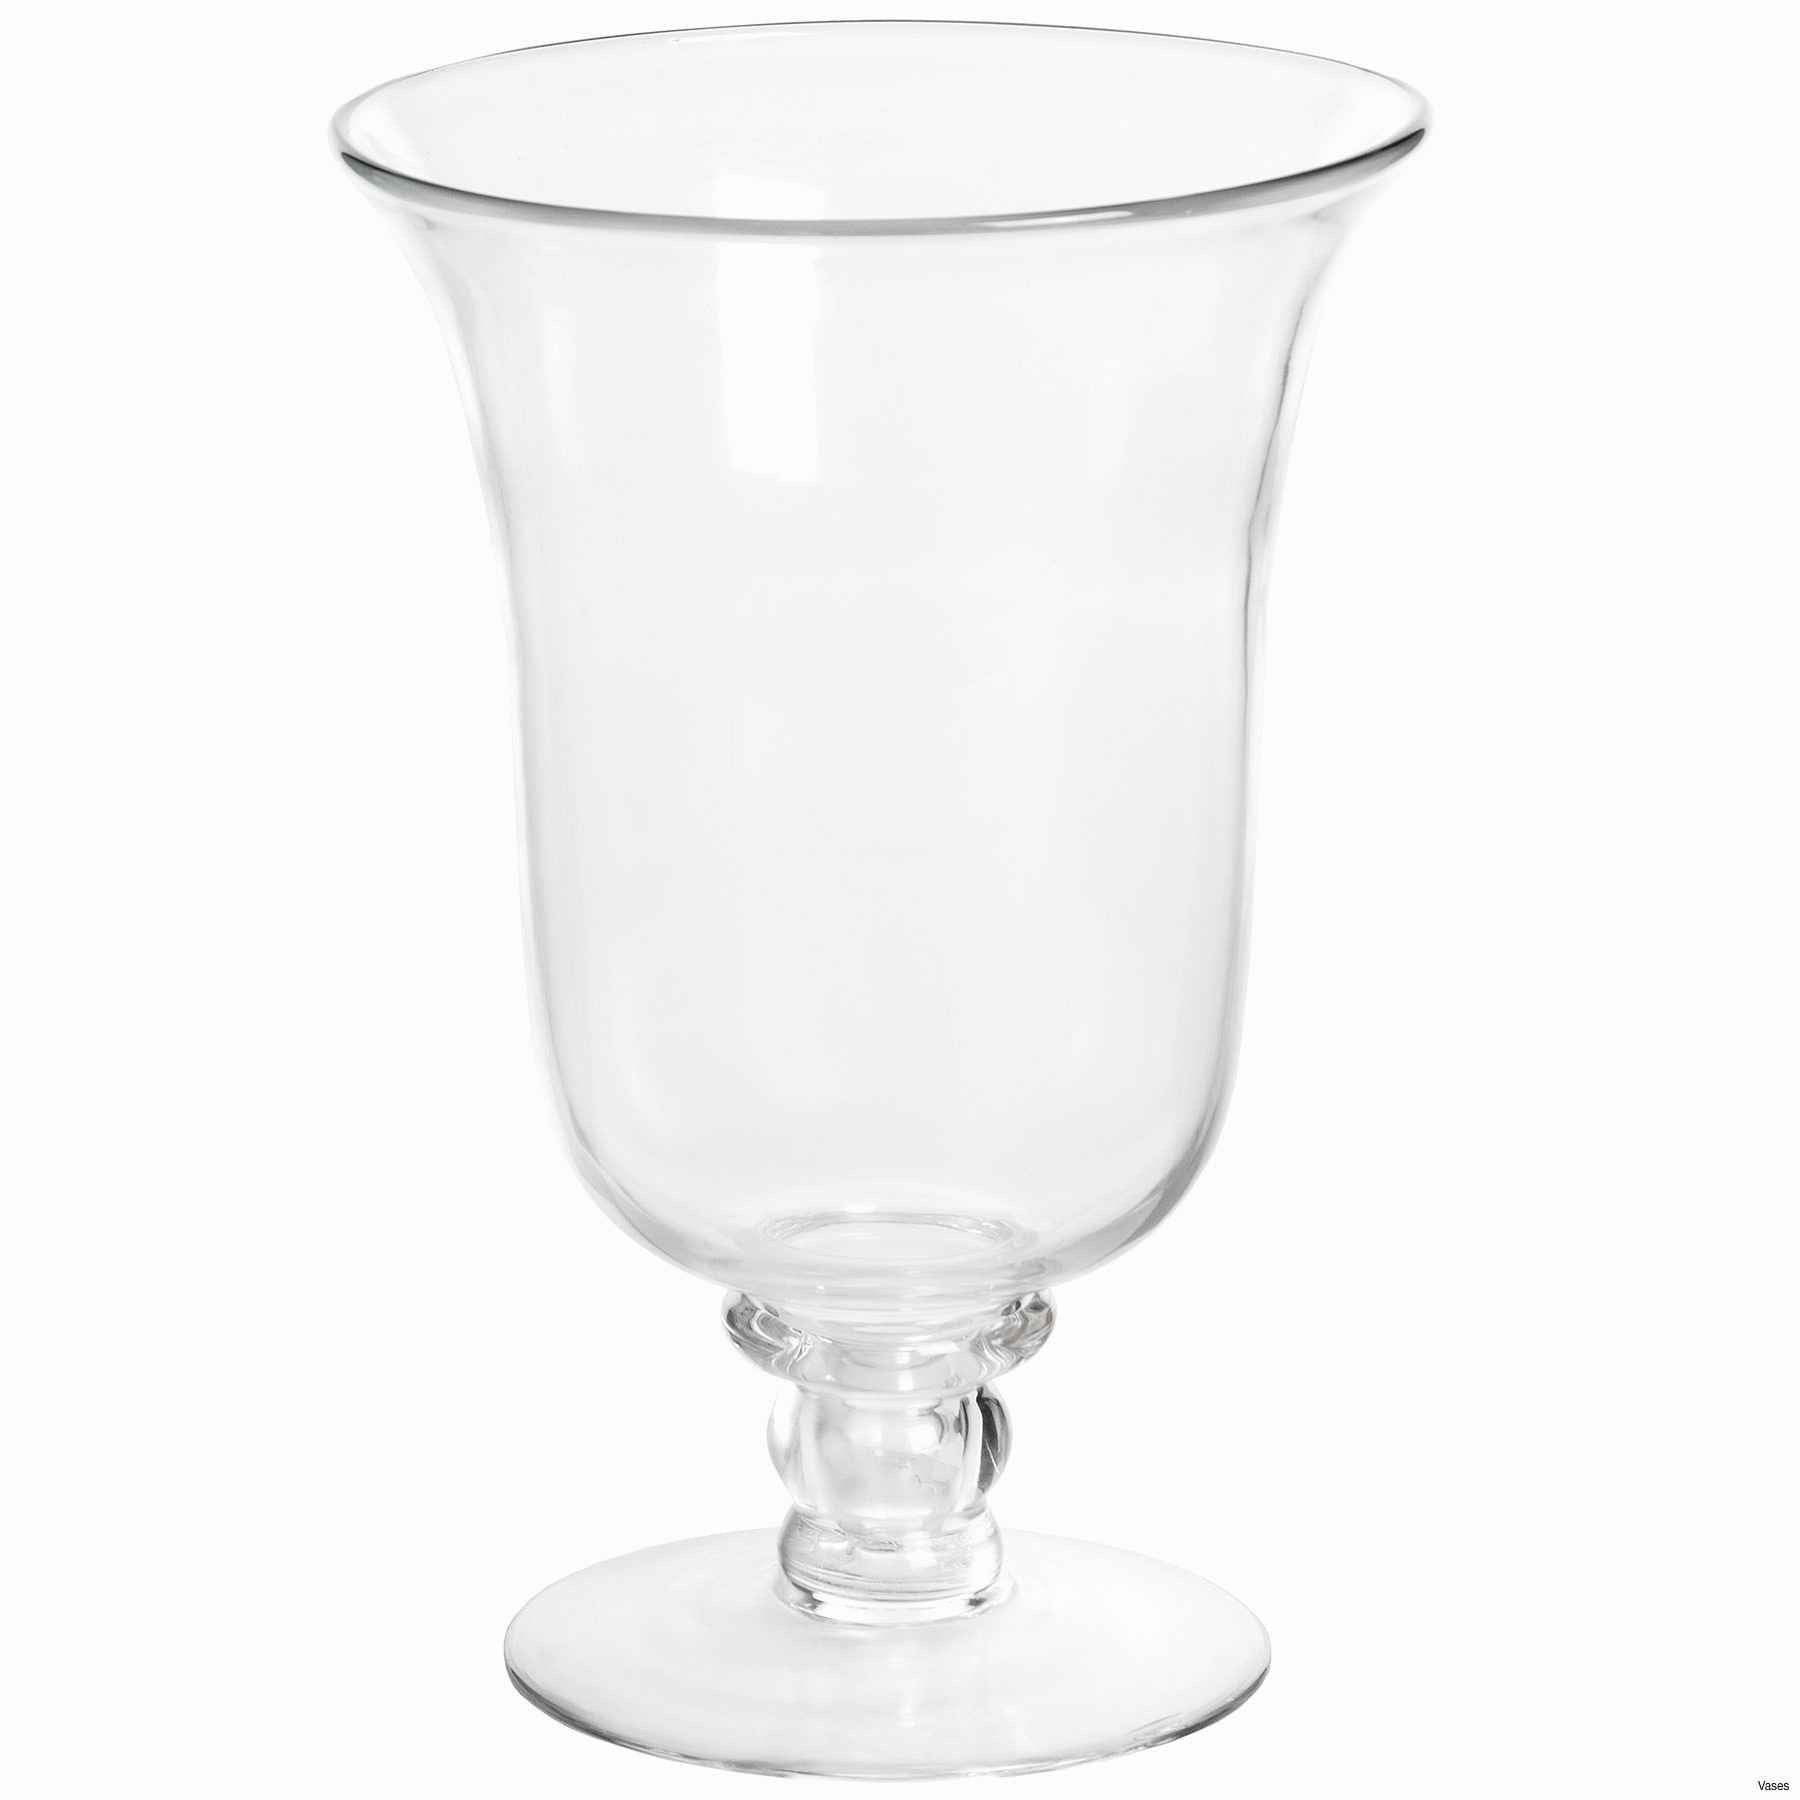 wholesale bulk glass vases of candle stands wholesale lovely faux crystal candle holders alive with regard to candle stands wholesale lovely faux crystal candle holders alive vases gold tall jpgi 0d cheap in